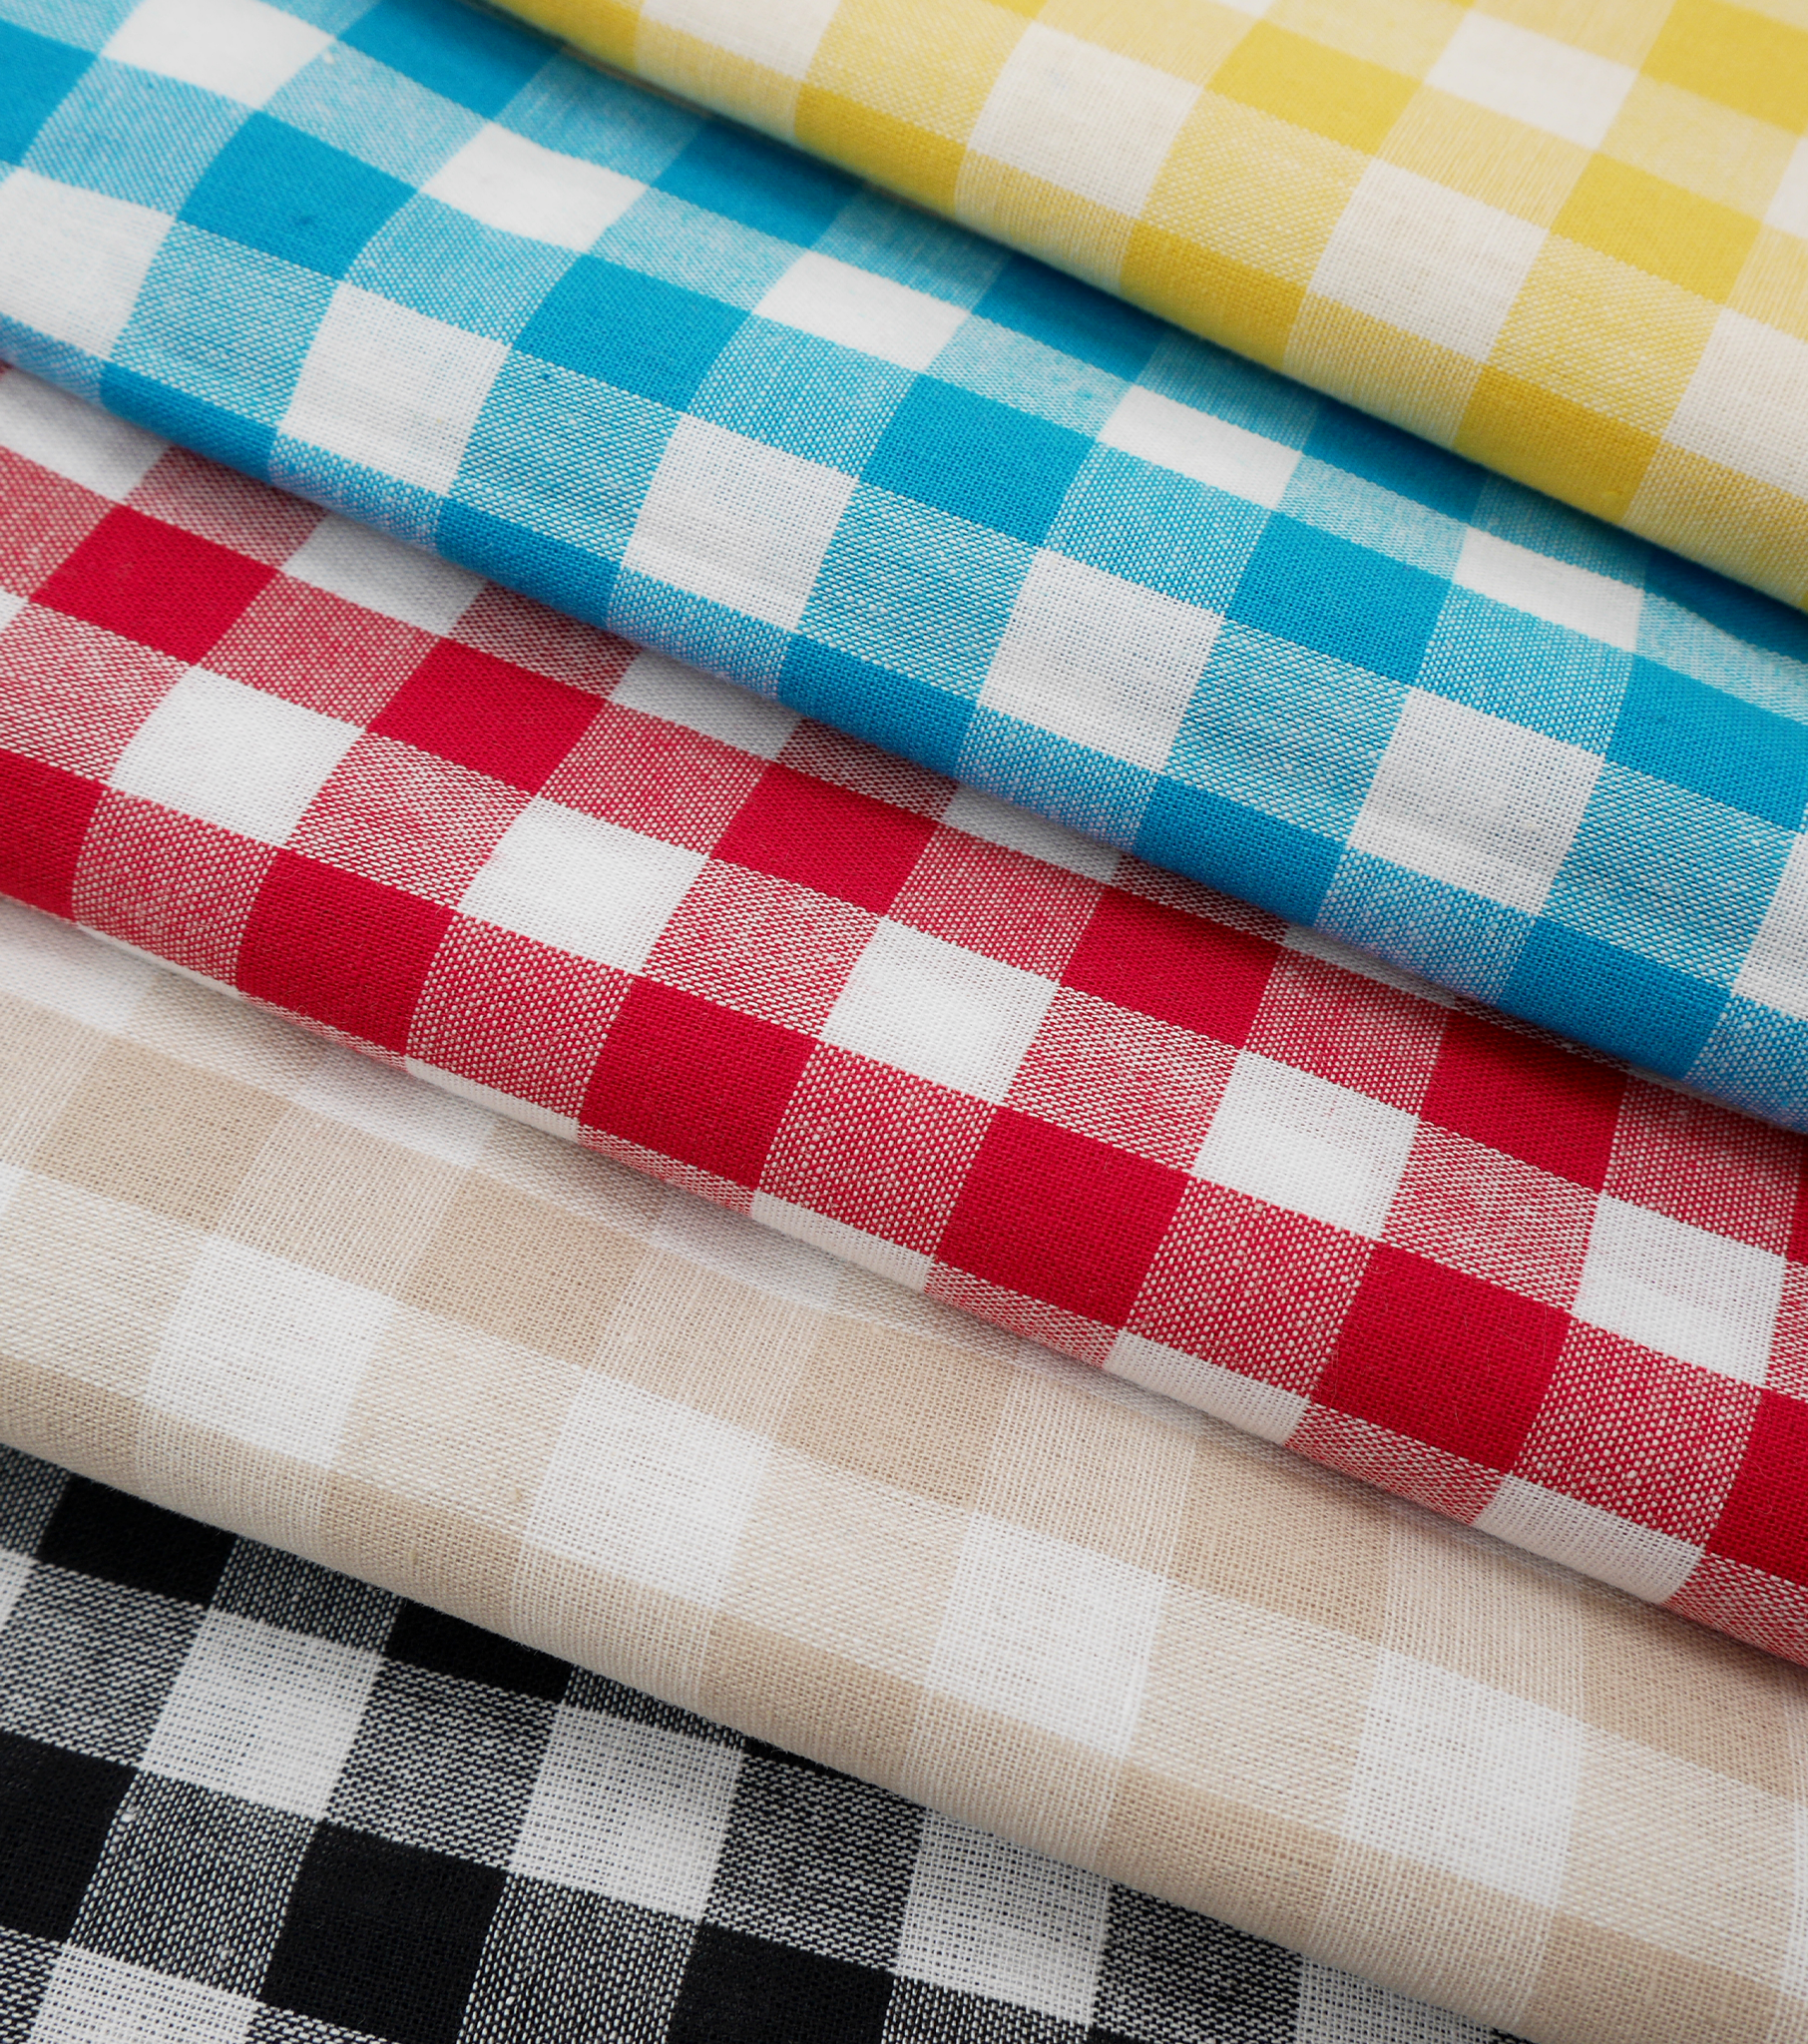 Cotton Gingham Print $14.00p/m -  Red & White (Large)